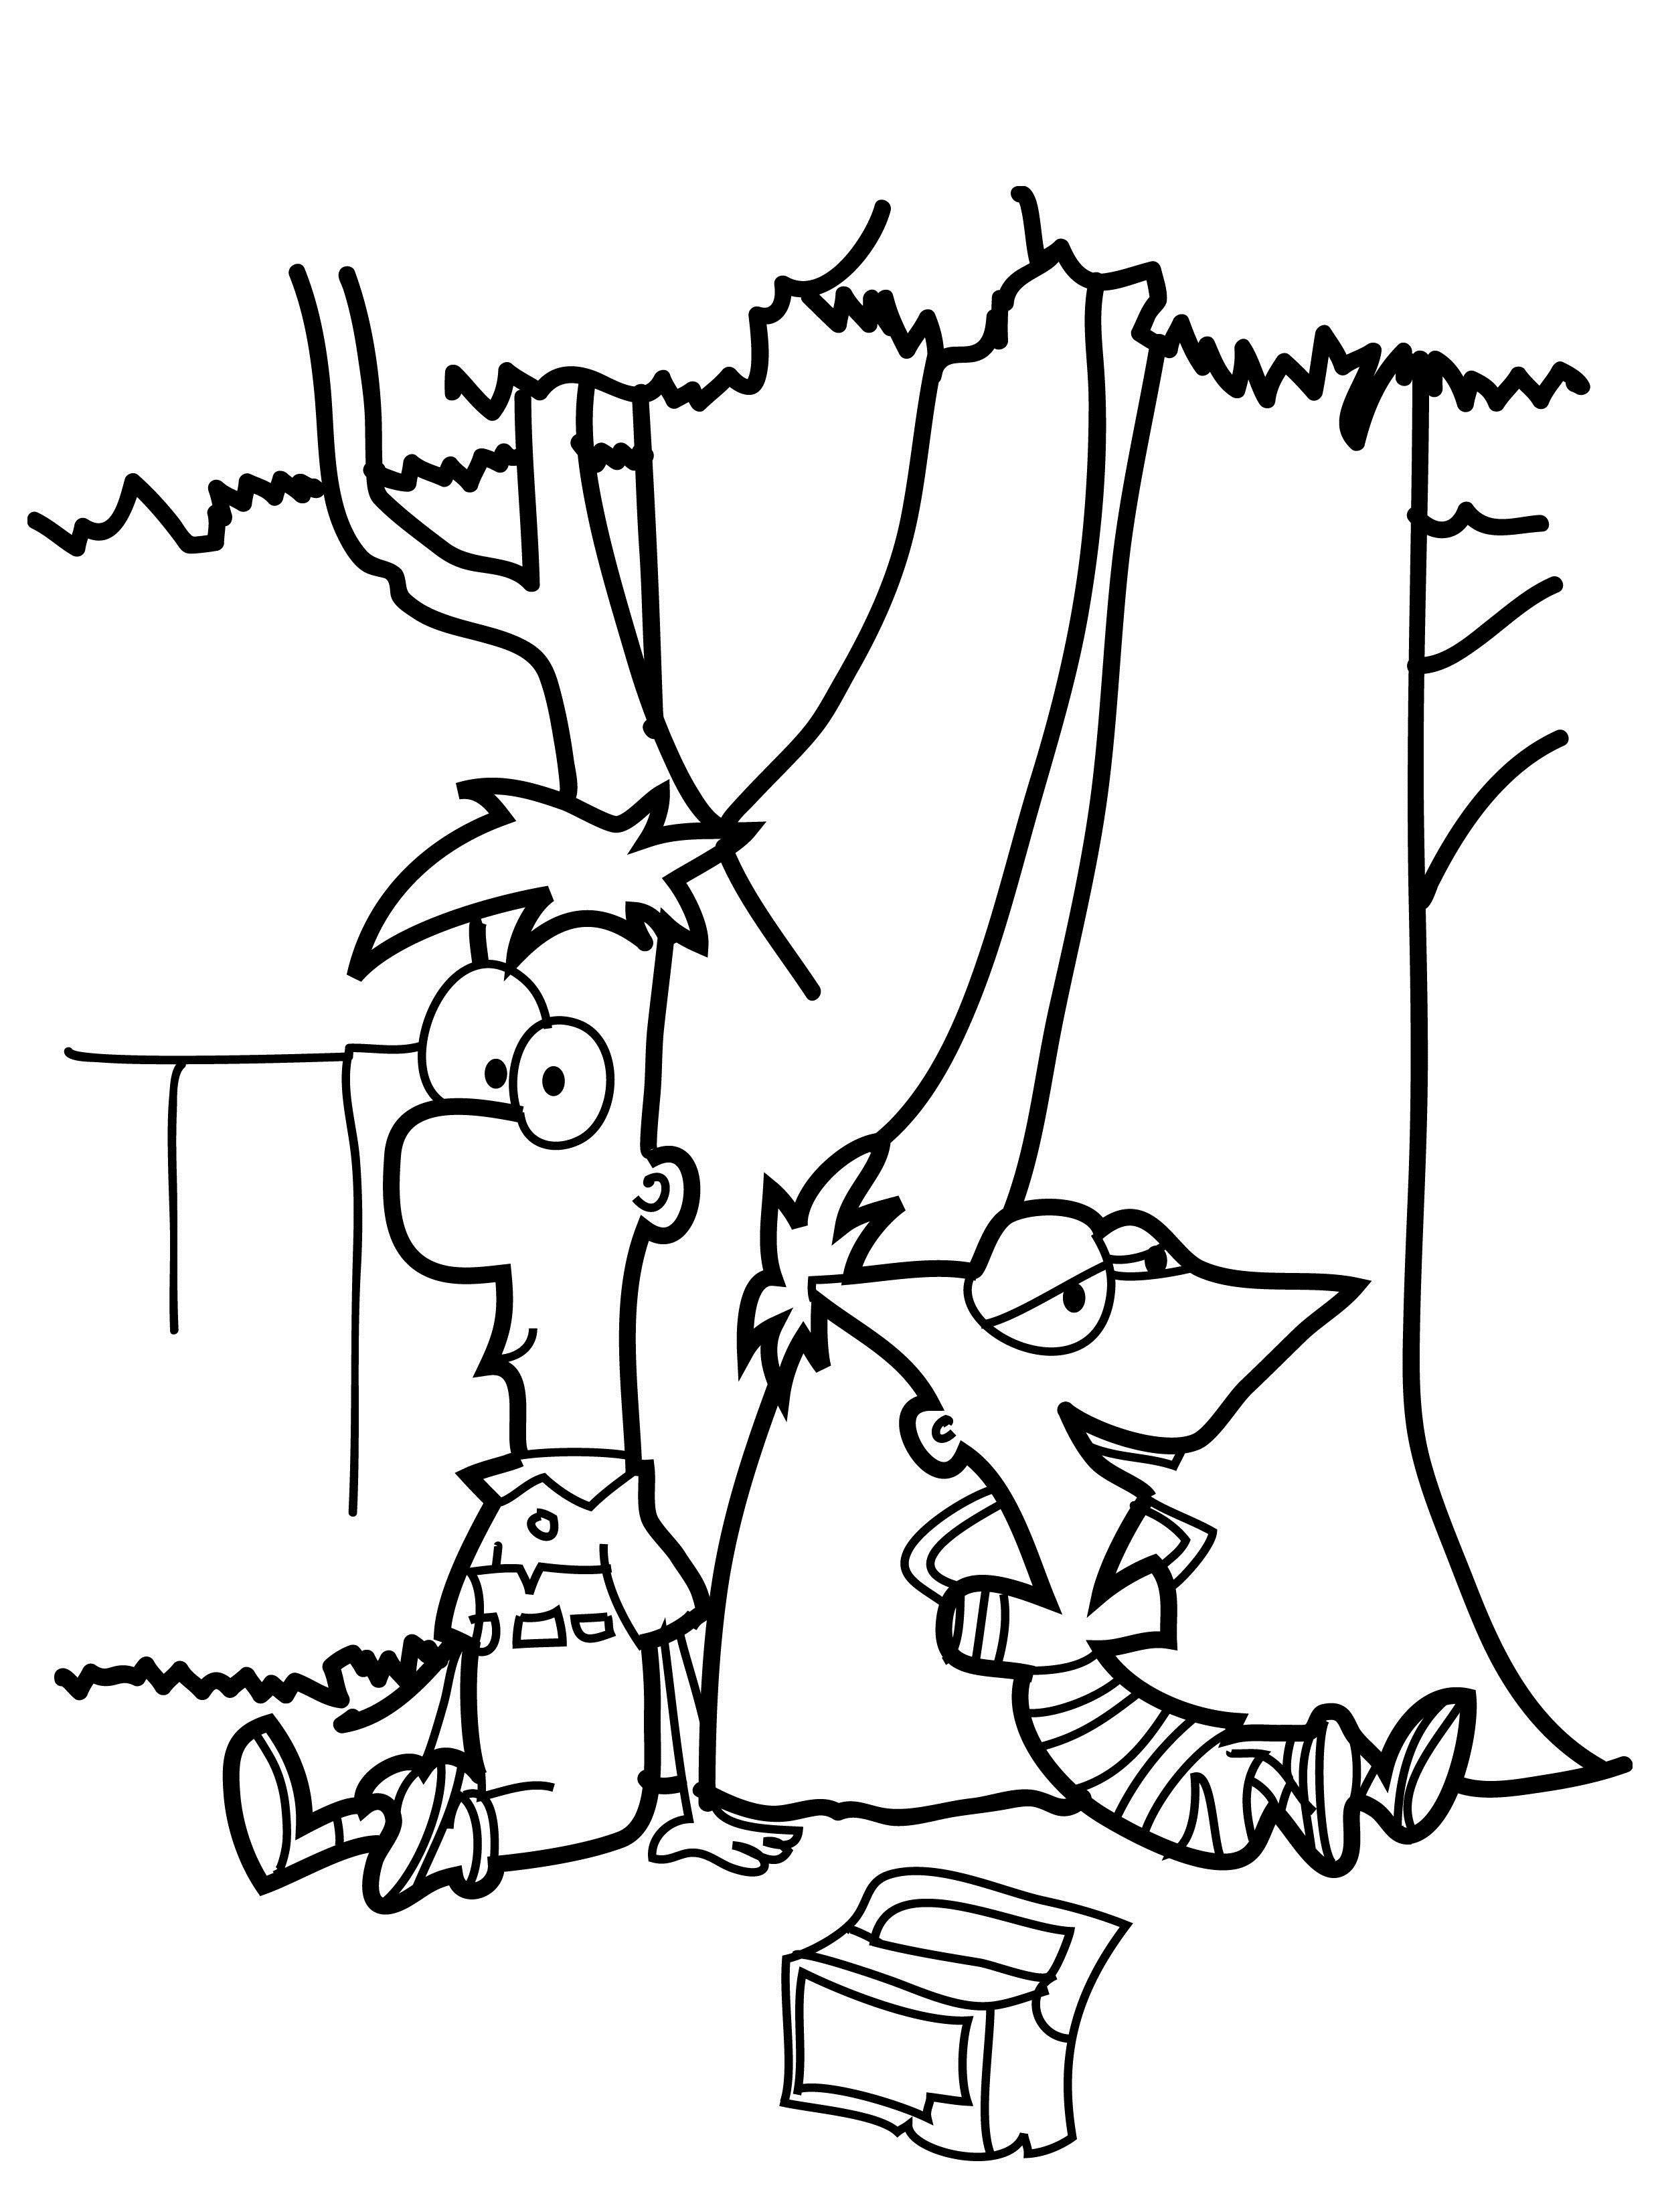 New Phineas and Ferb Coloring Pages to Print | Top Free Printable